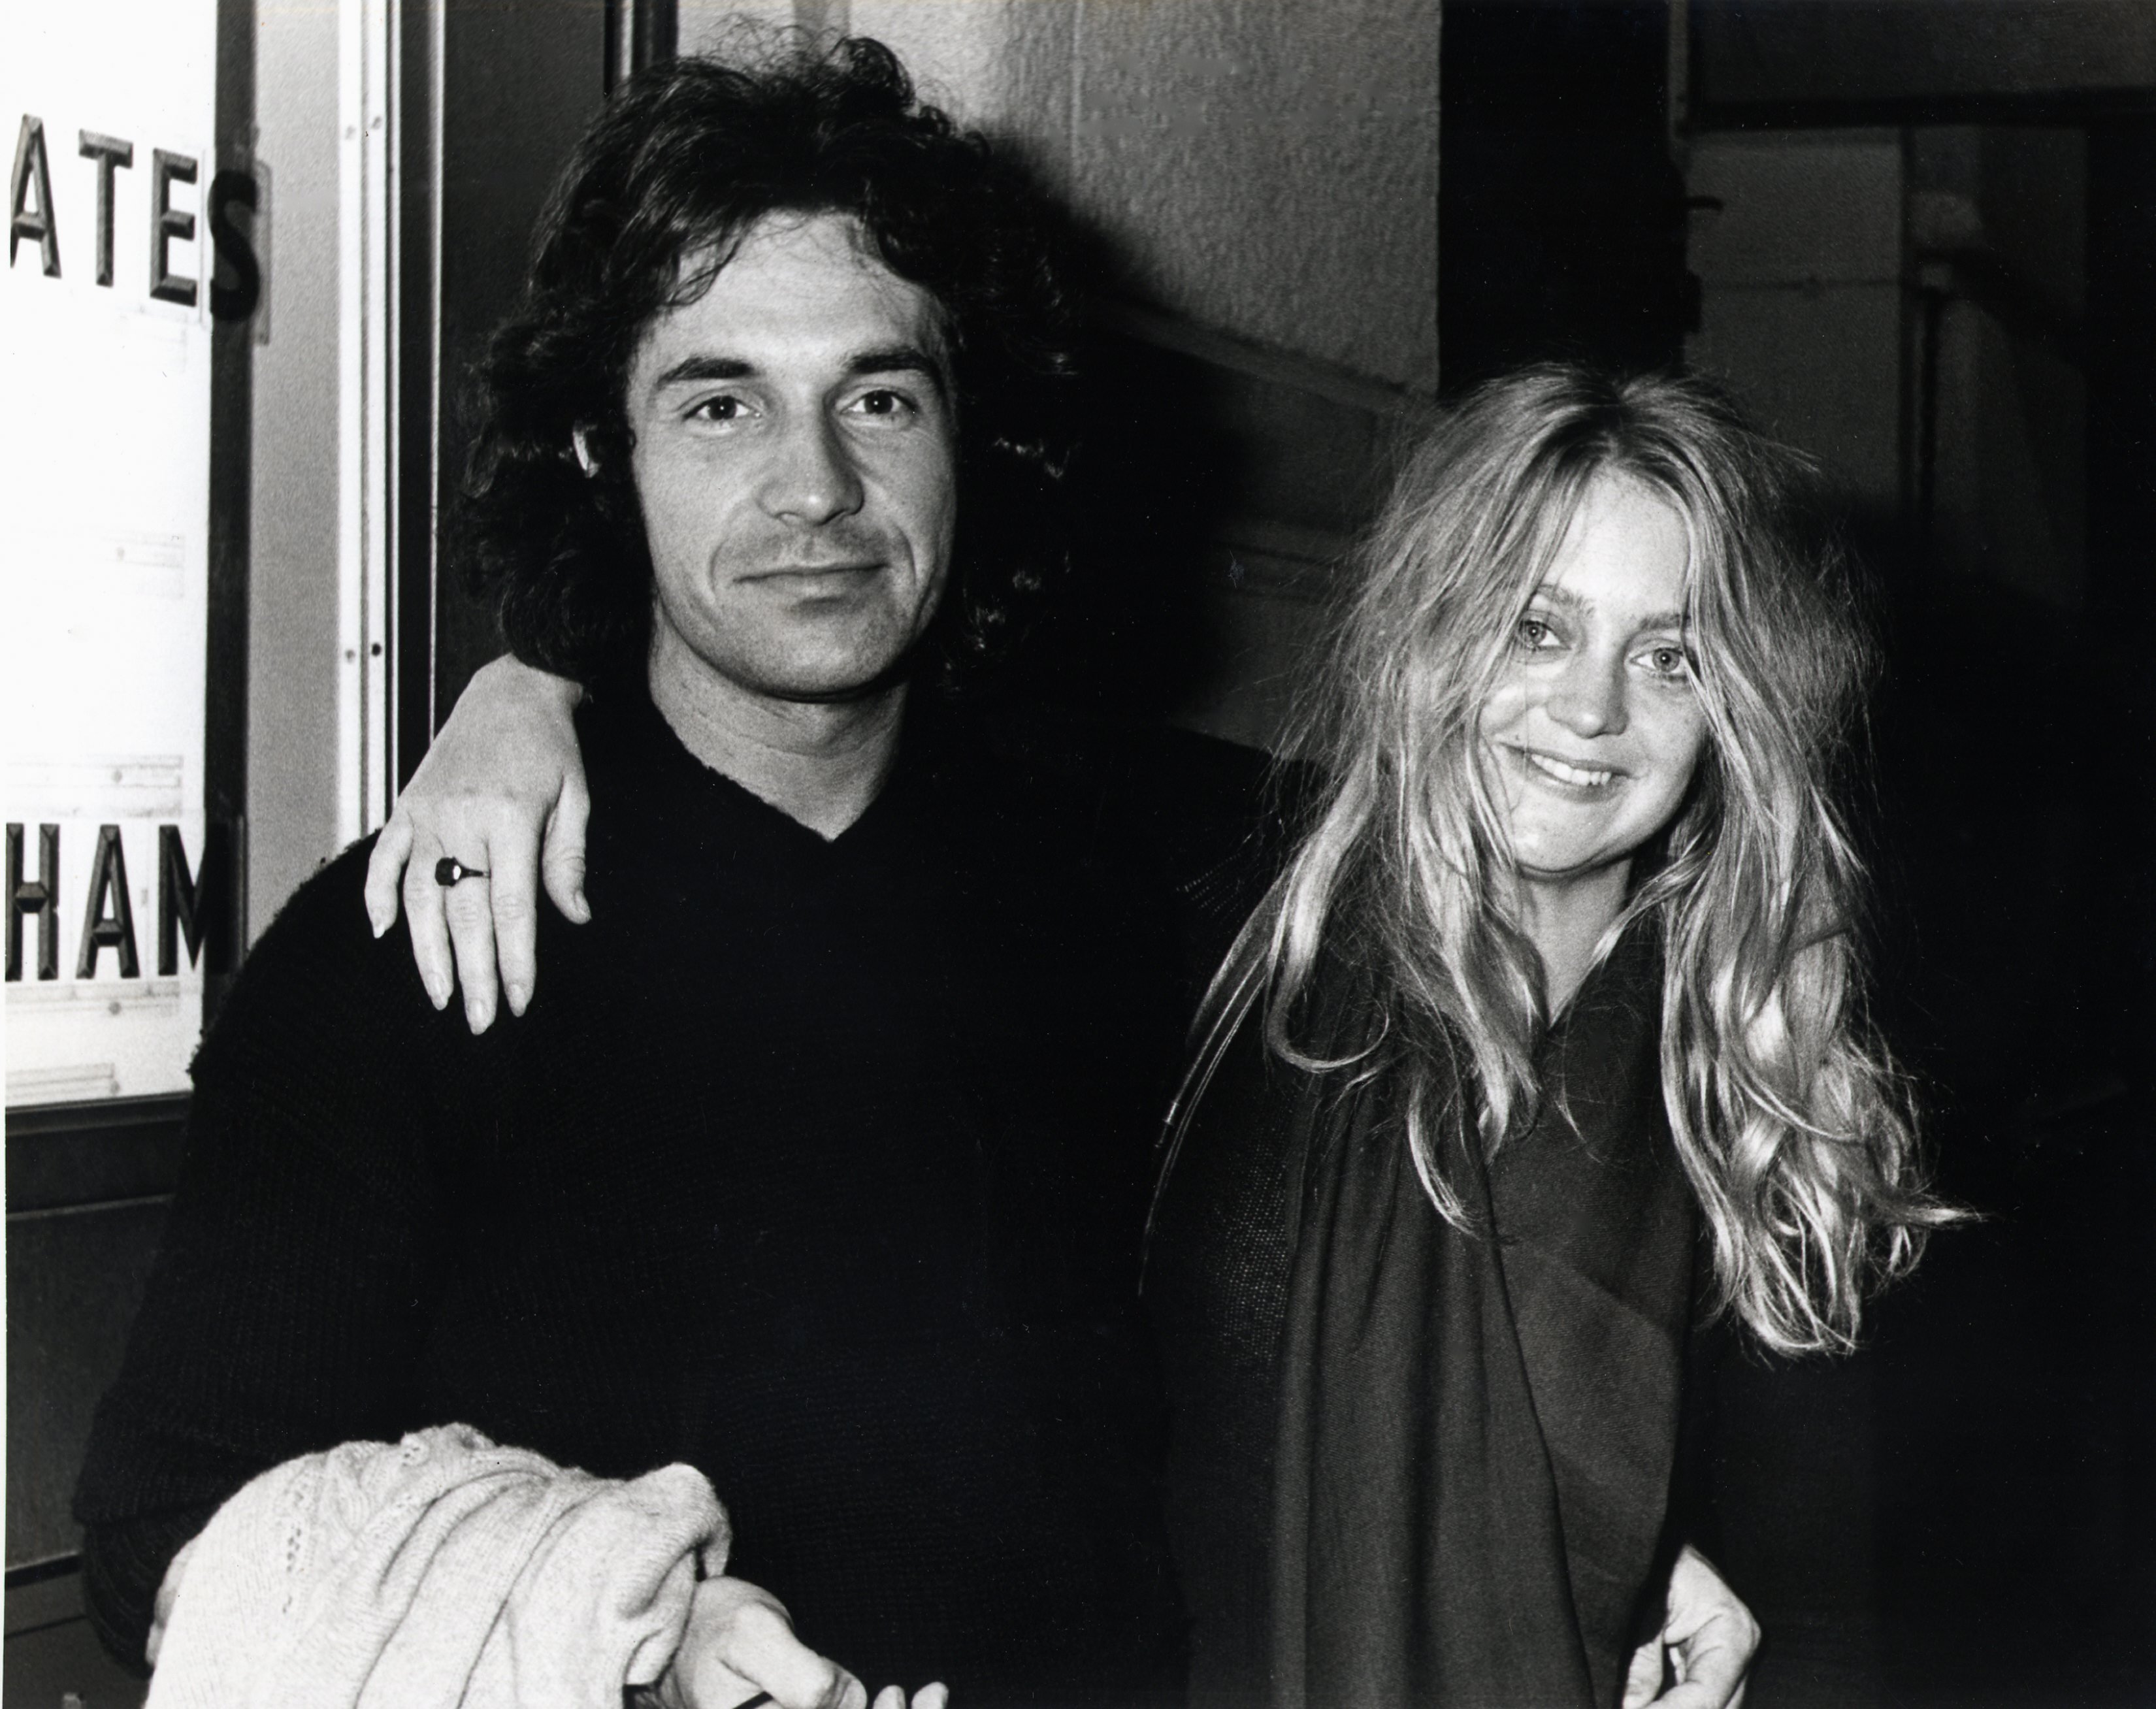 Musician Bill Hudson pictured with his wife, actress Goldie Hawn on November 20, 1976 | Source: Getty Images